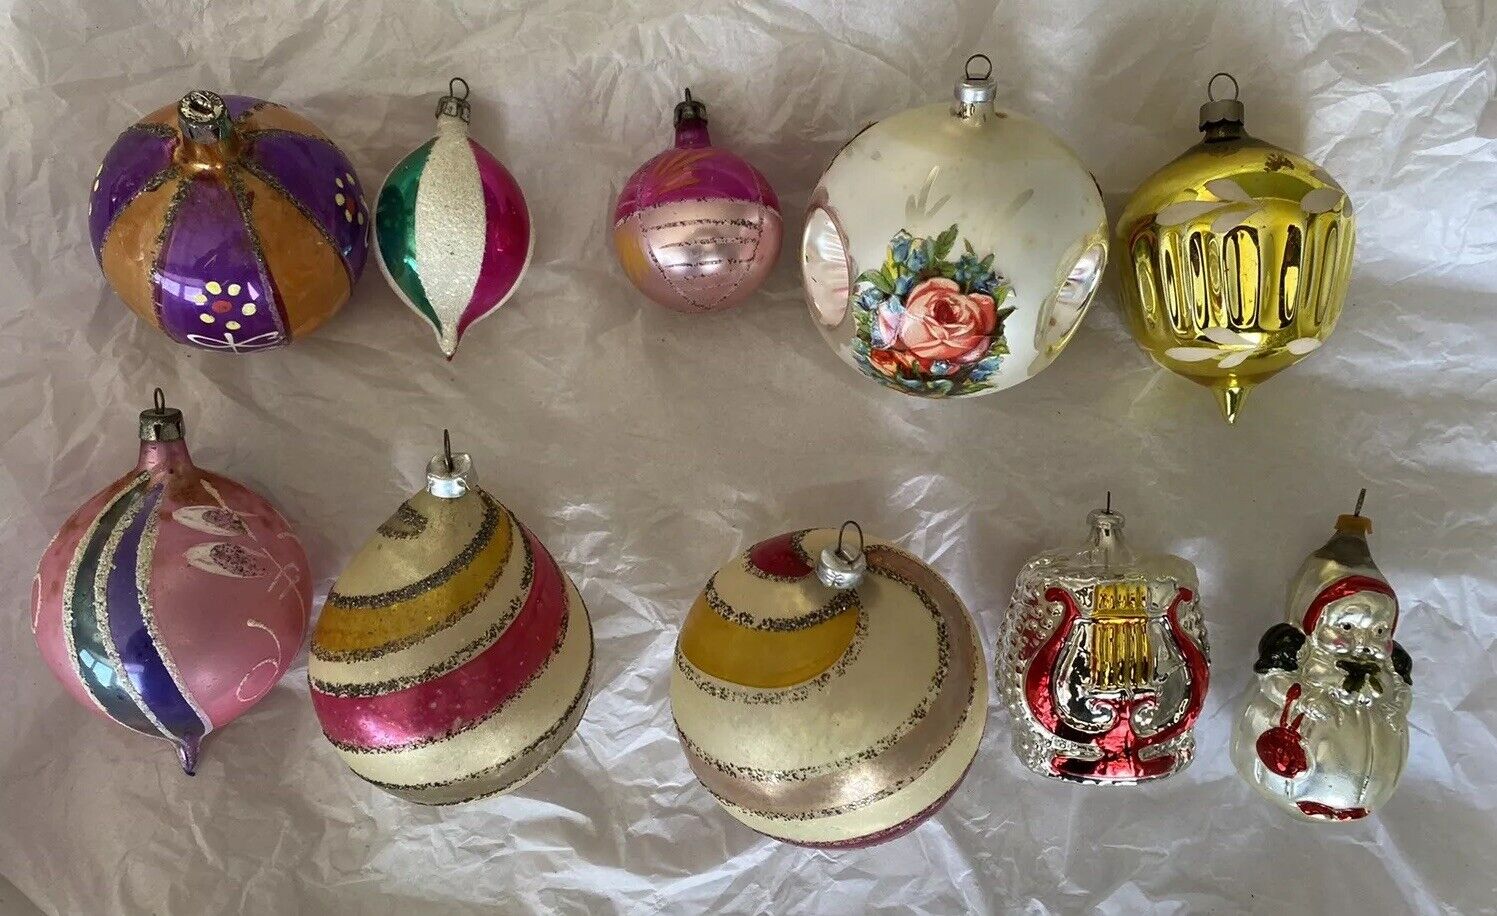 Vintage Antique Blown Glass Christmas Ornaments - Mixed Lot of 10